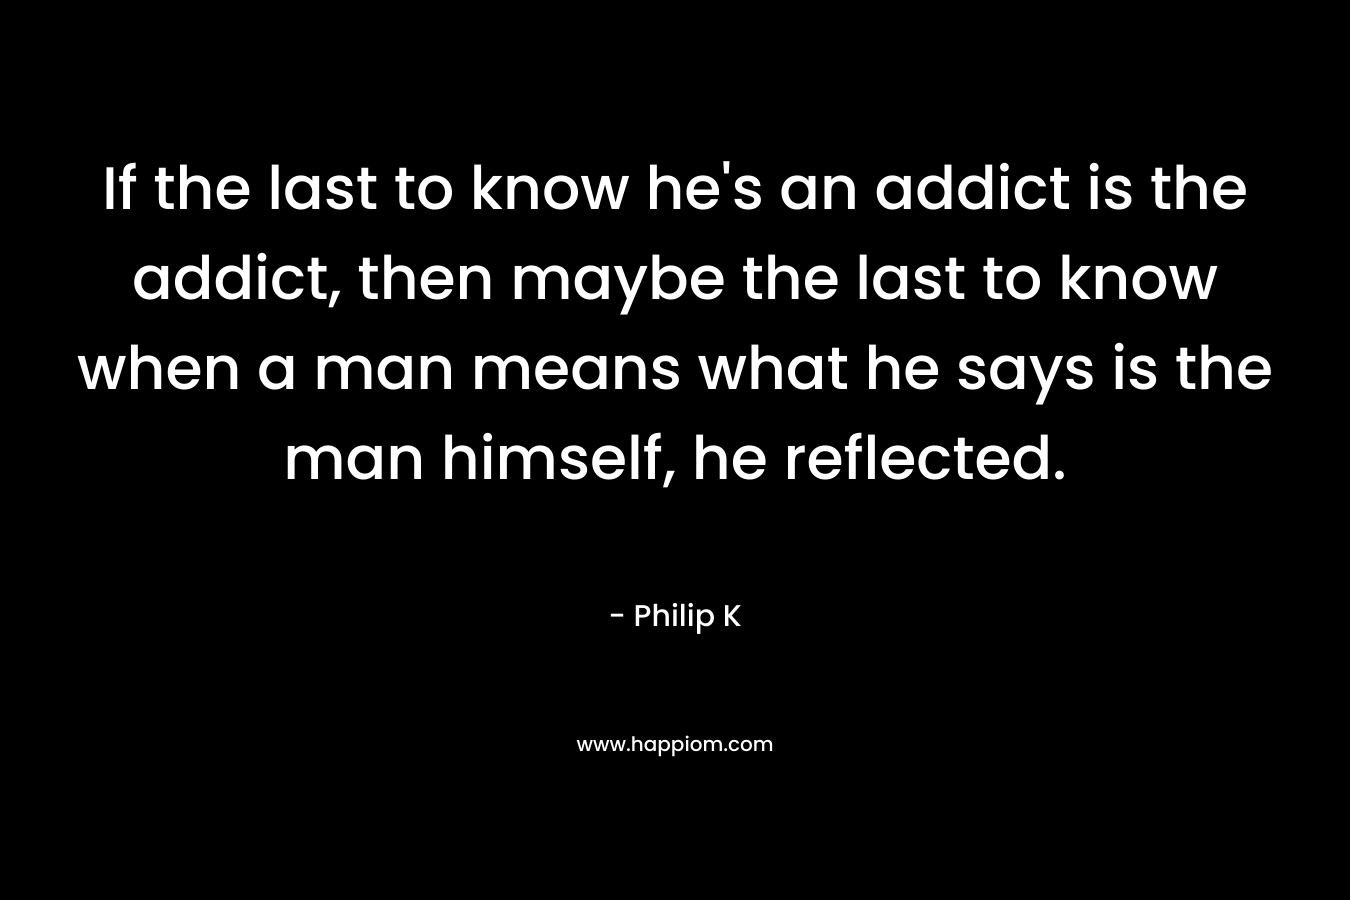 If the last to know he’s an addict is the addict, then maybe the last to know when a man means what he says is the man himself, he reflected. – Philip K